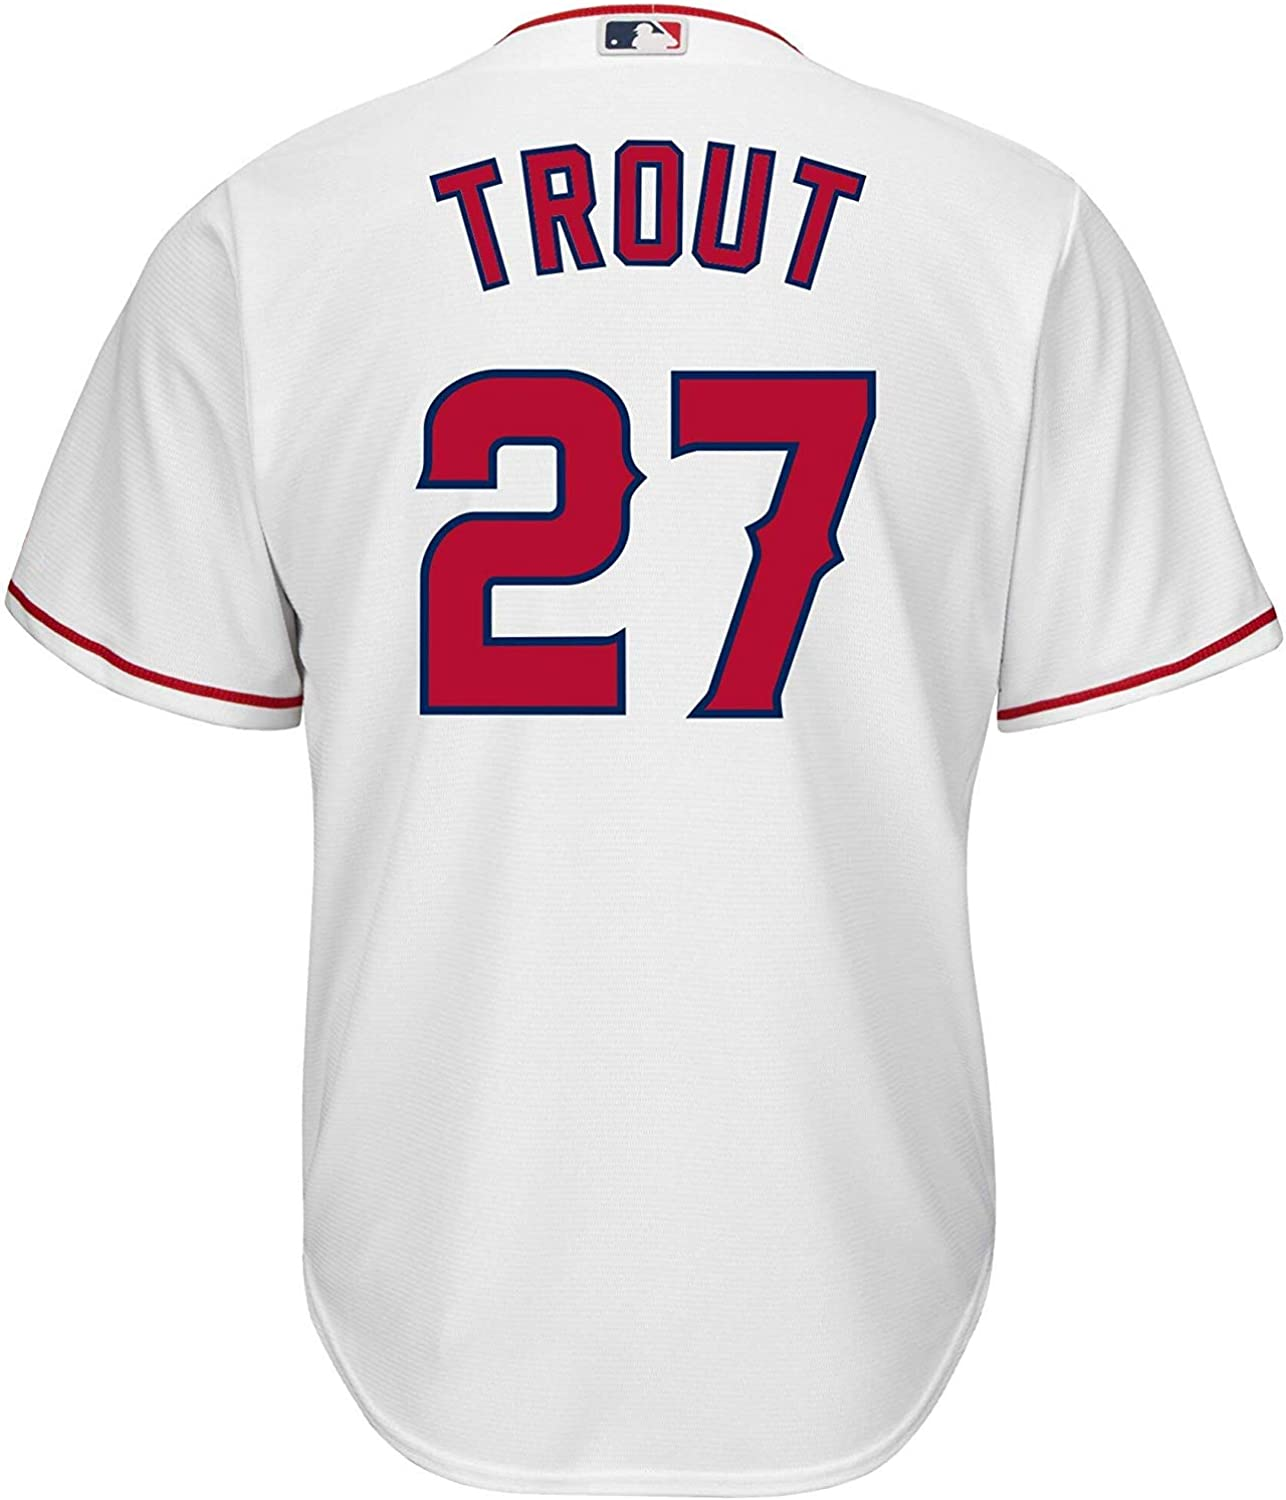 MIKE TROUT KIDS REPLICA LOS ANGELES ANGELS JERSEY - WHITE